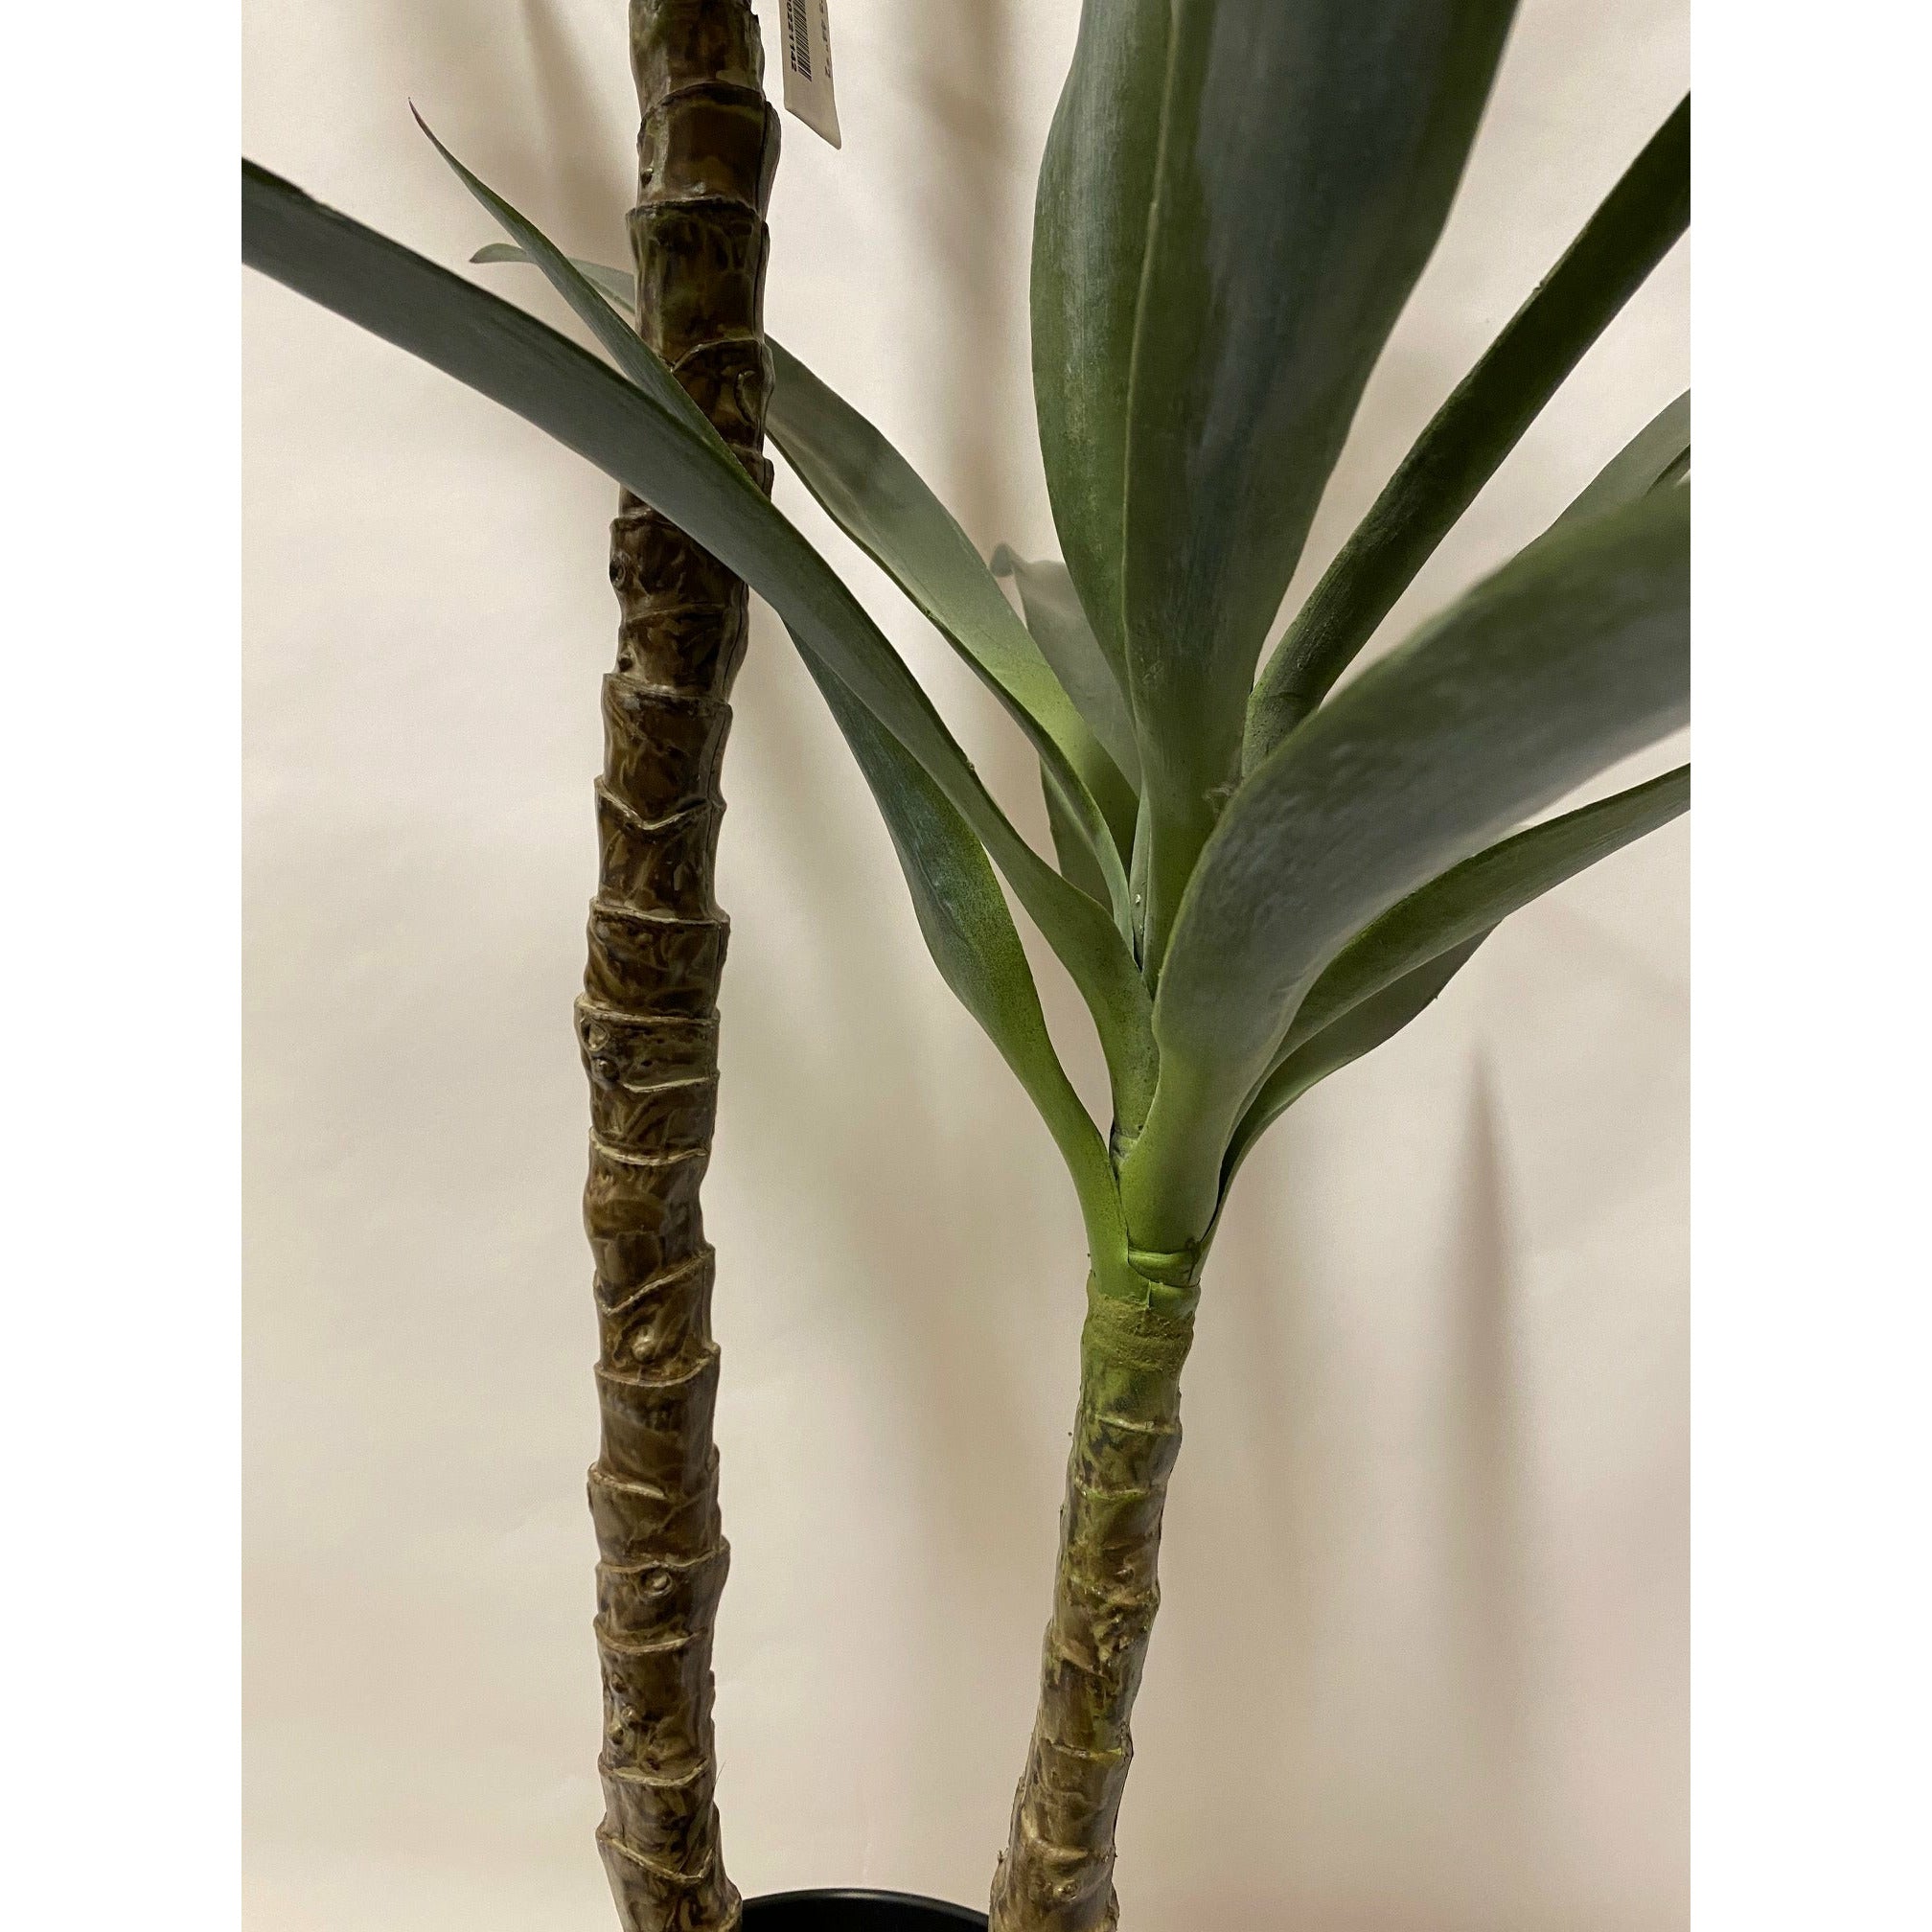 Yucca double head real touch 44""